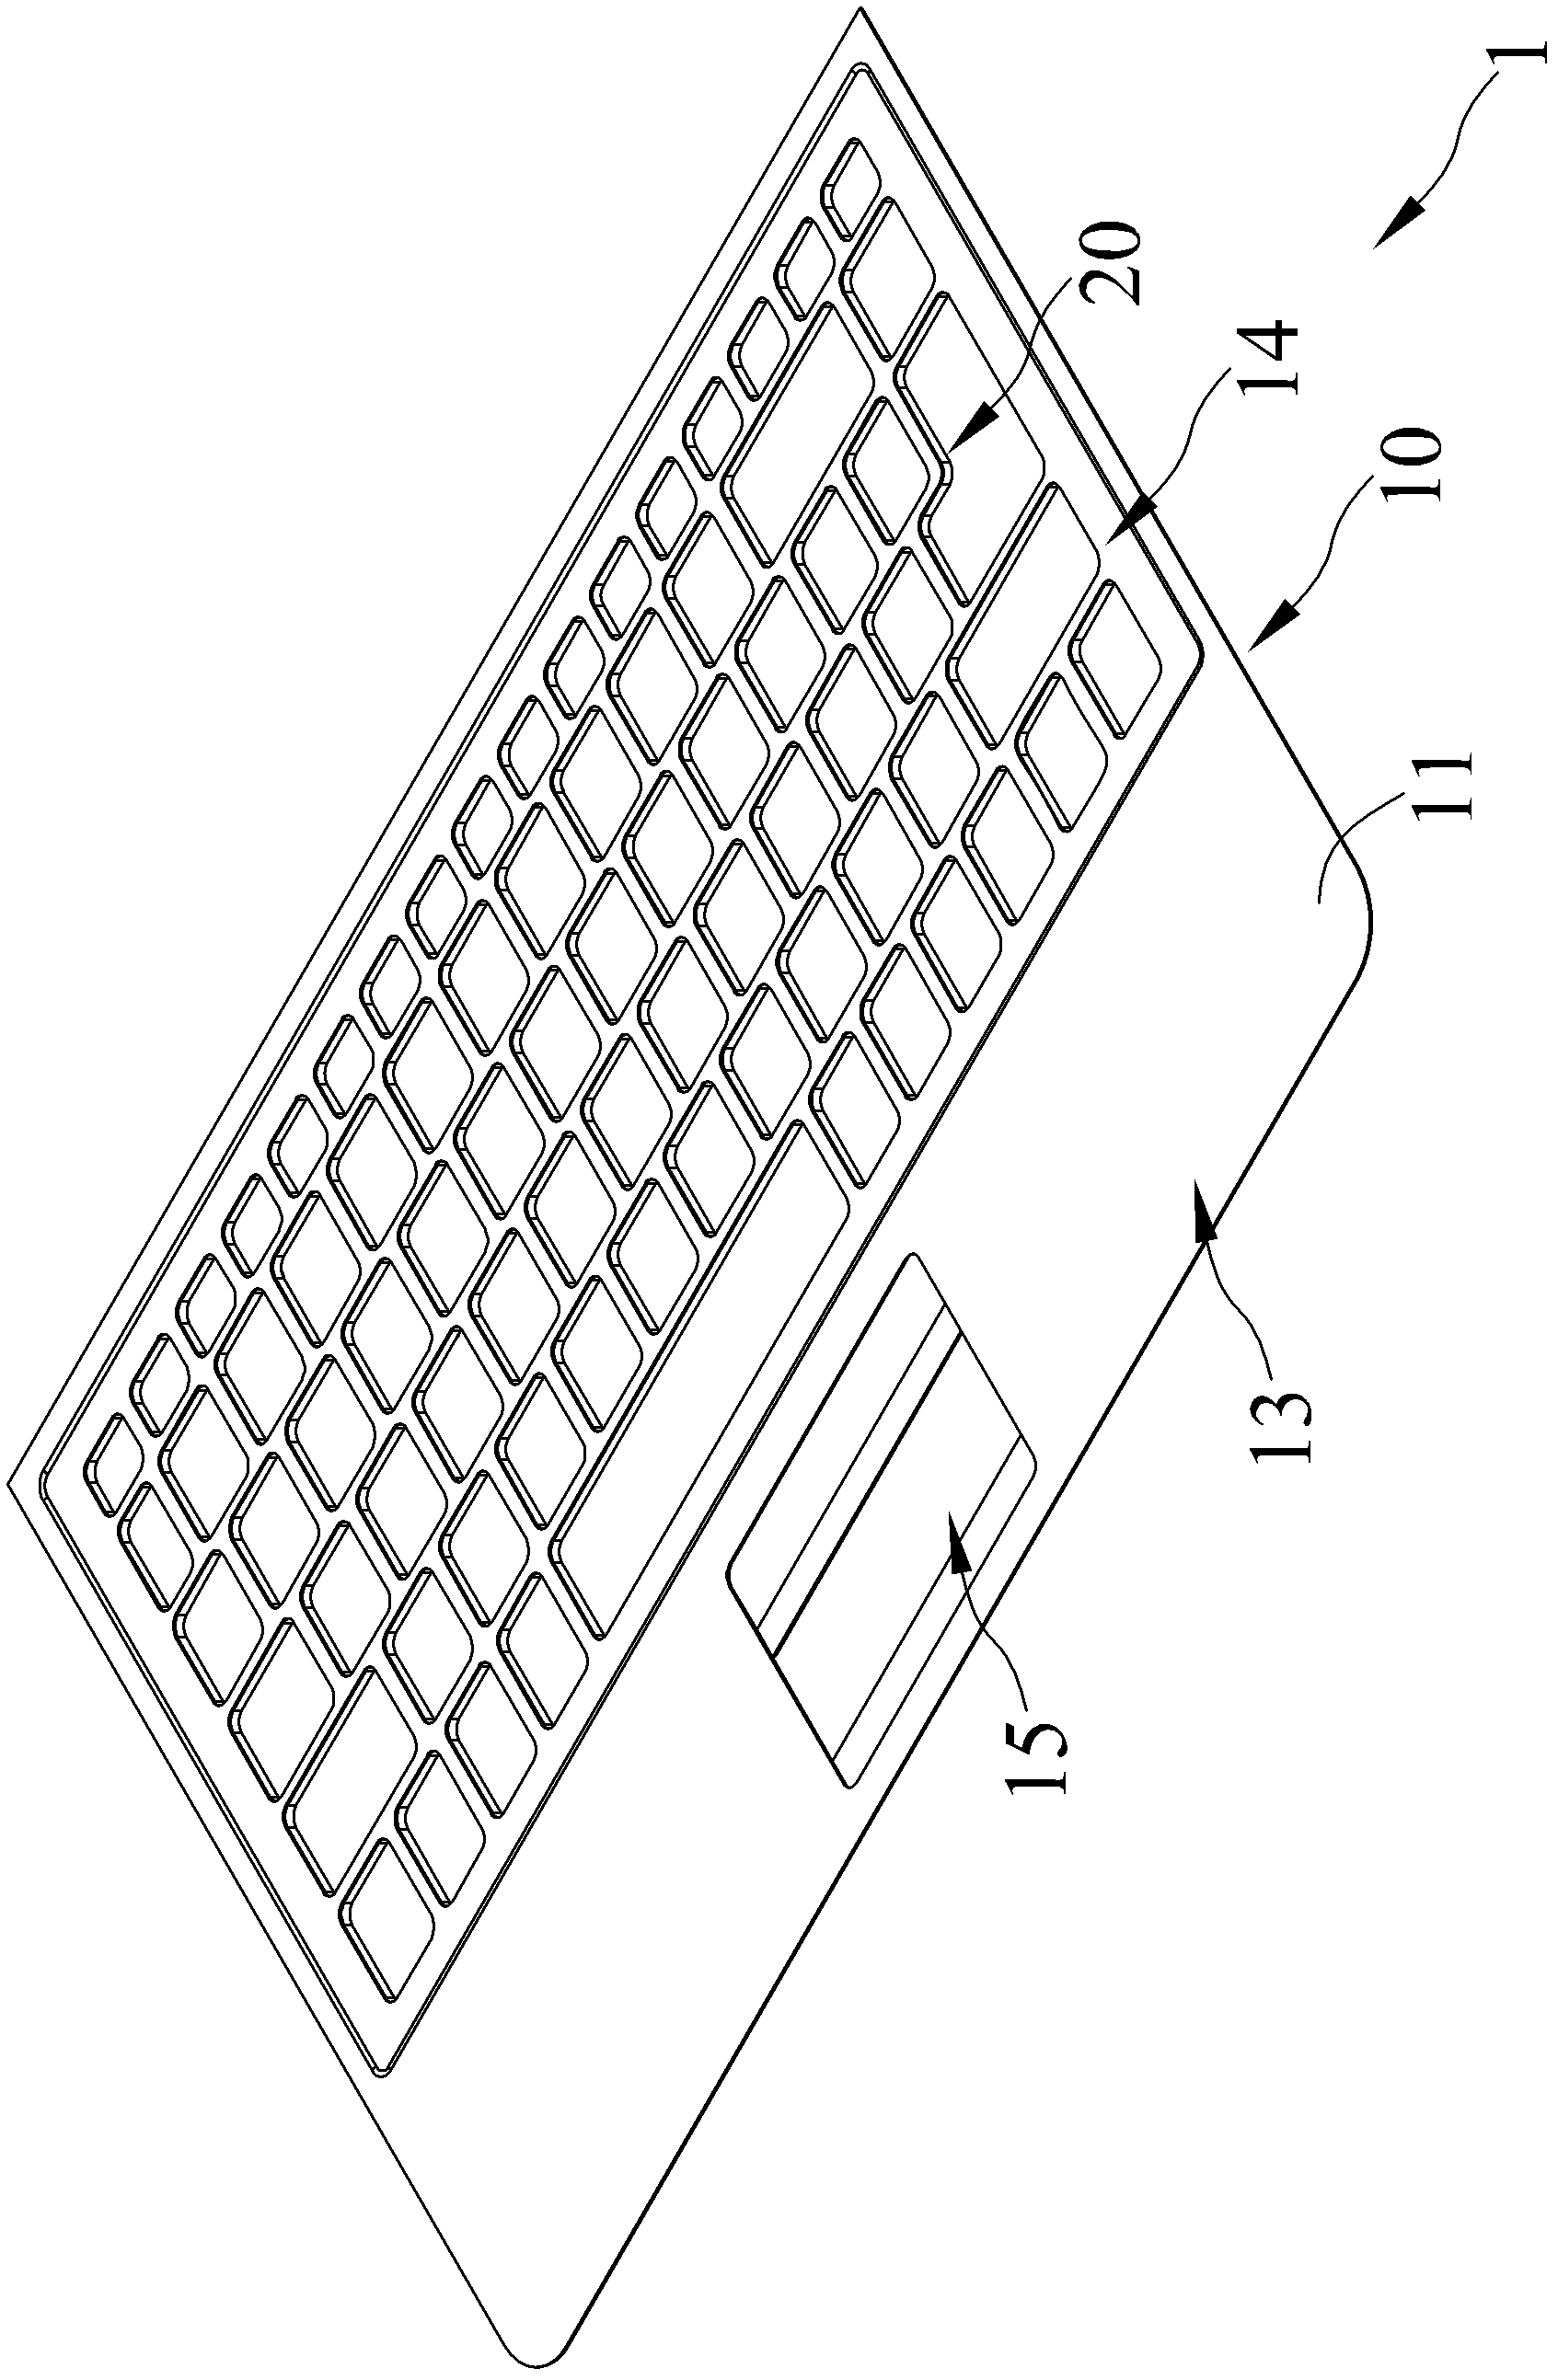 Keyboard framework with preferred structure strength